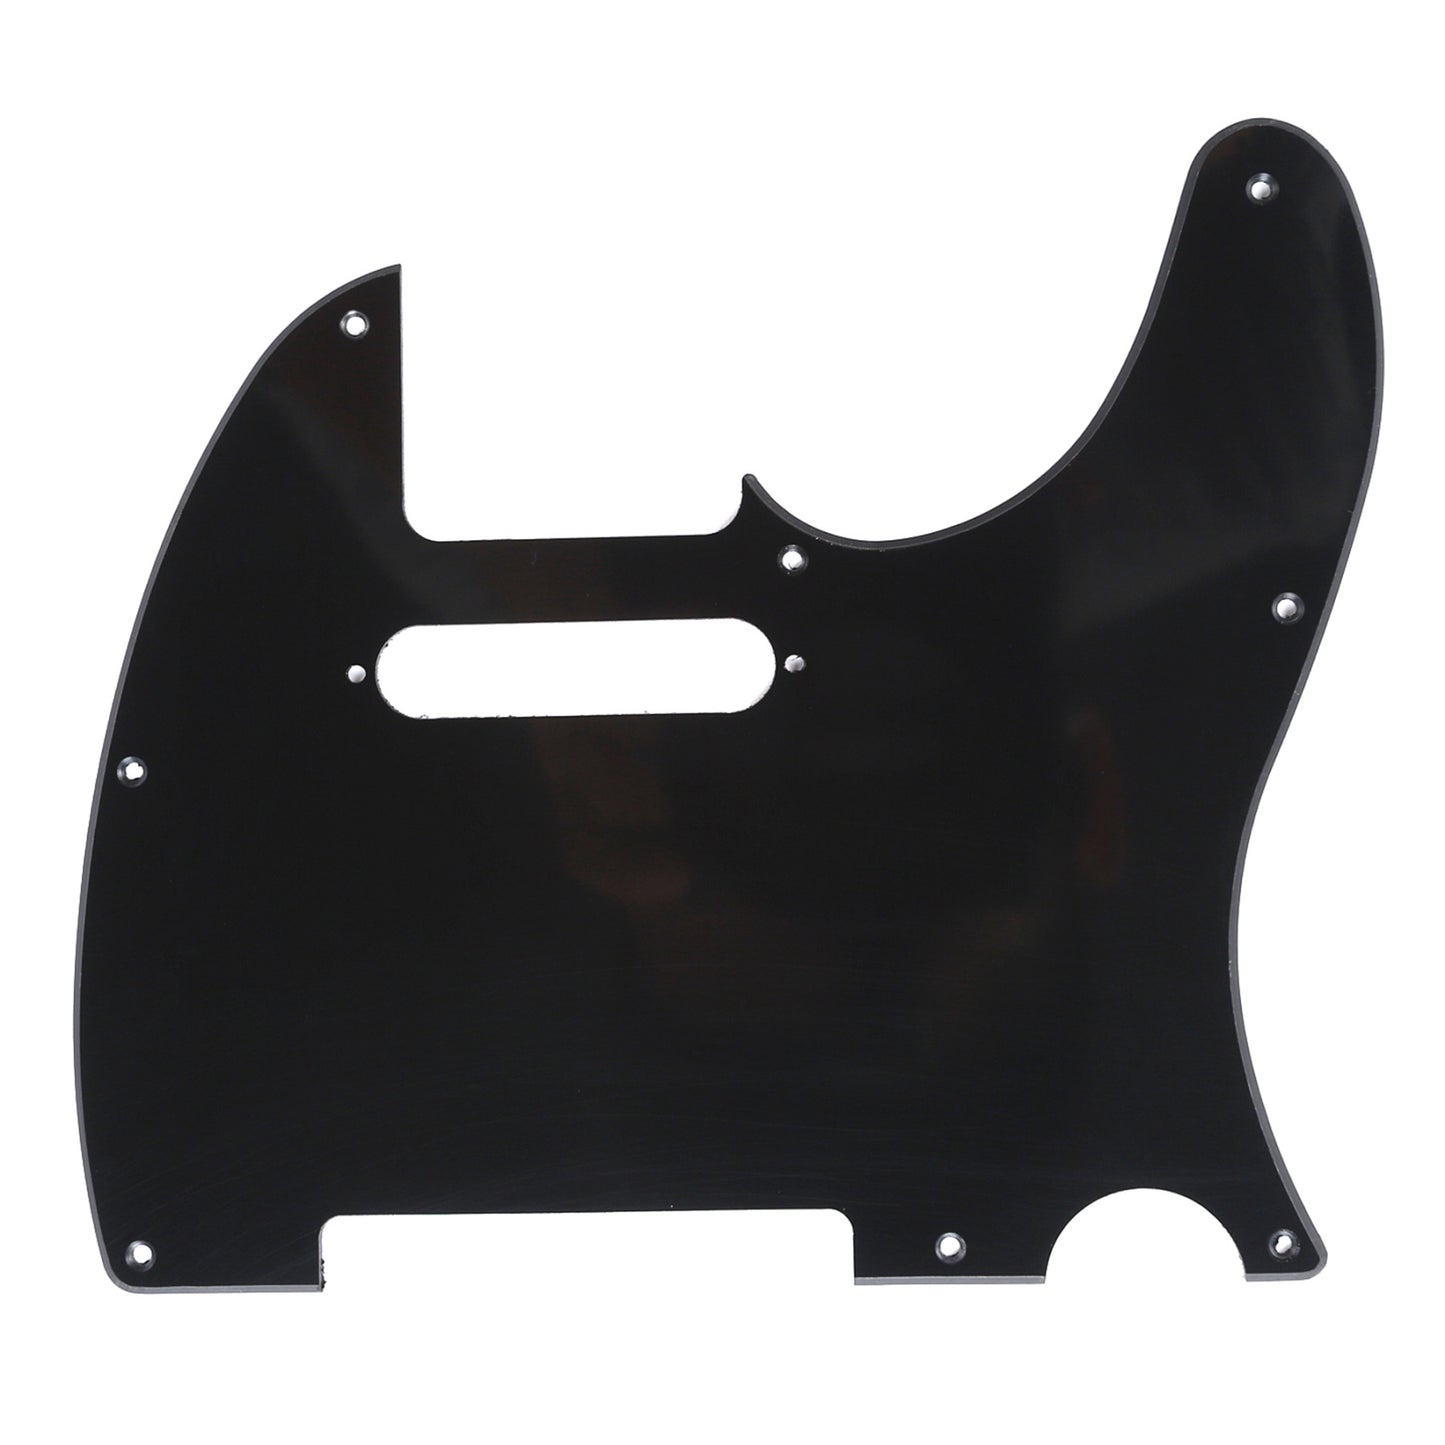 Musiclily 8 Hole Tele Guitar Pickguard for USA/Mexican Made Fender Standard Telecaster Modern Style, 1Ply Black